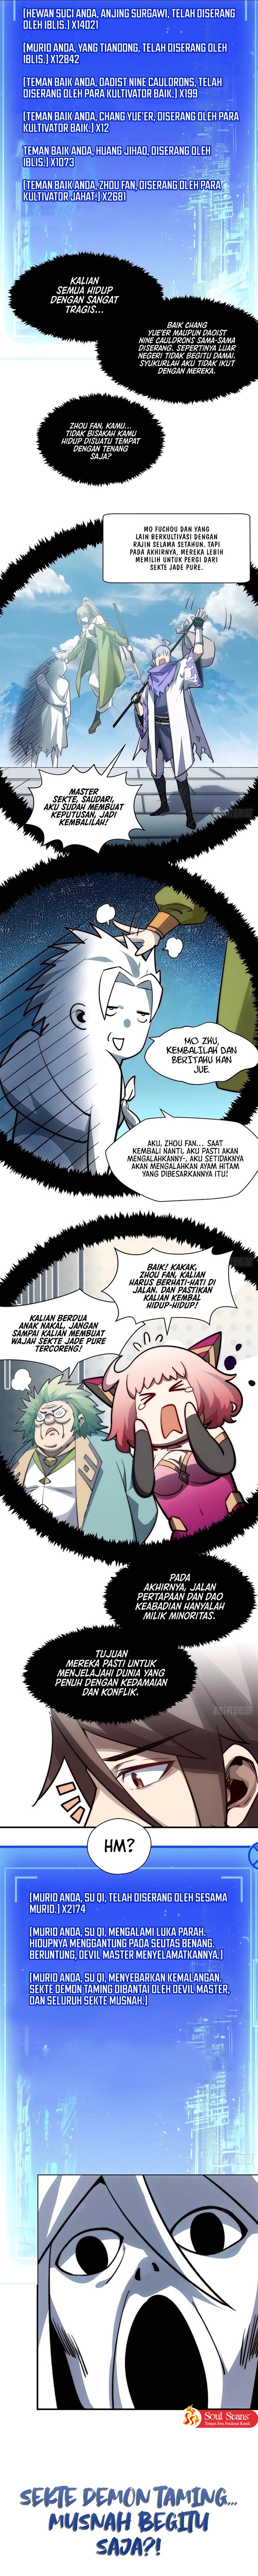 Dilarang COPAS - situs resmi www.mangacanblog.com - Komik top tier providence secretly cultivate for a thousand years 104 - chapter 104 105 Indonesia top tier providence secretly cultivate for a thousand years 104 - chapter 104 Terbaru 4|Baca Manga Komik Indonesia|Mangacan